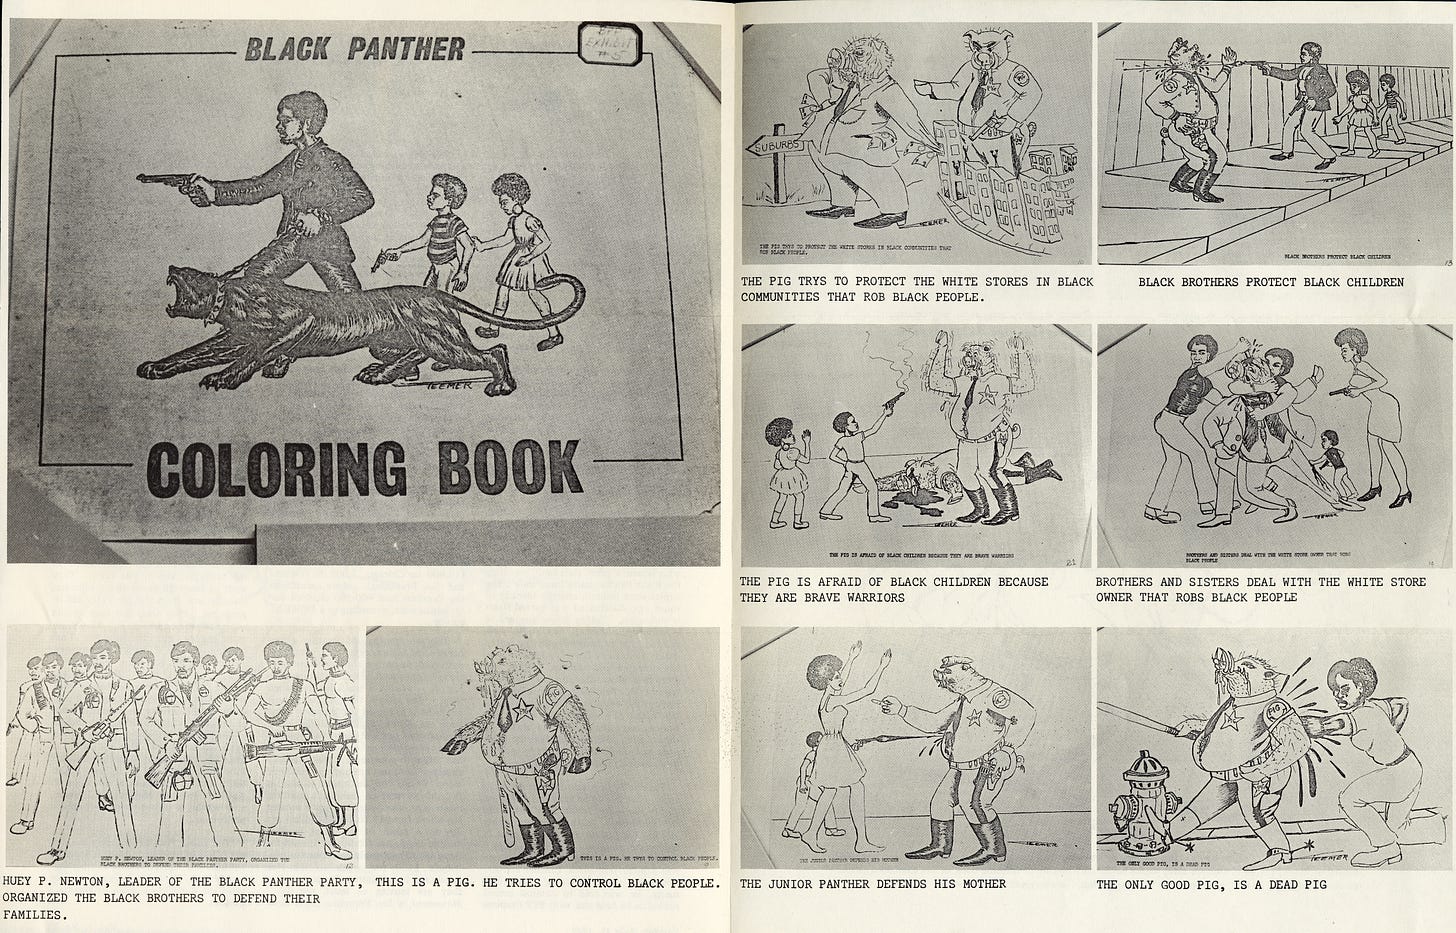 Scanned pages from the “BLACK PANTHER COLORING BOOK” depicting racist characterizations of Black Panther Party representatives promoting violence and antagonizing police.